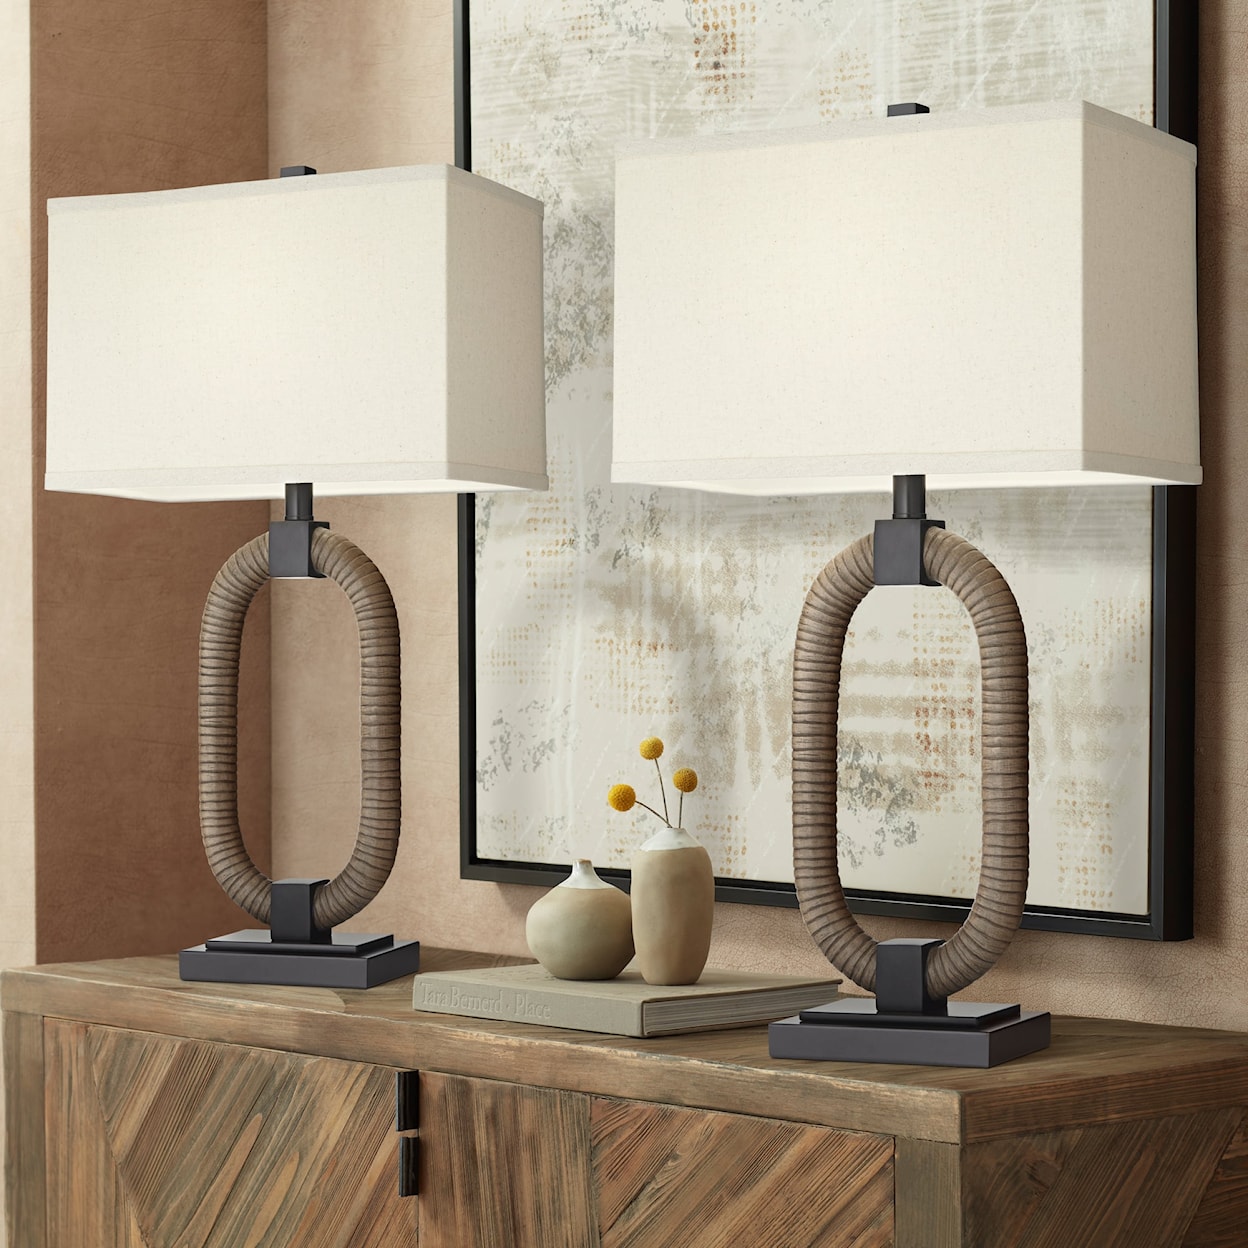 Pacific Coast Lighting Pacific Coast Lighting TL-Set of 2 poly and metal oval lamp